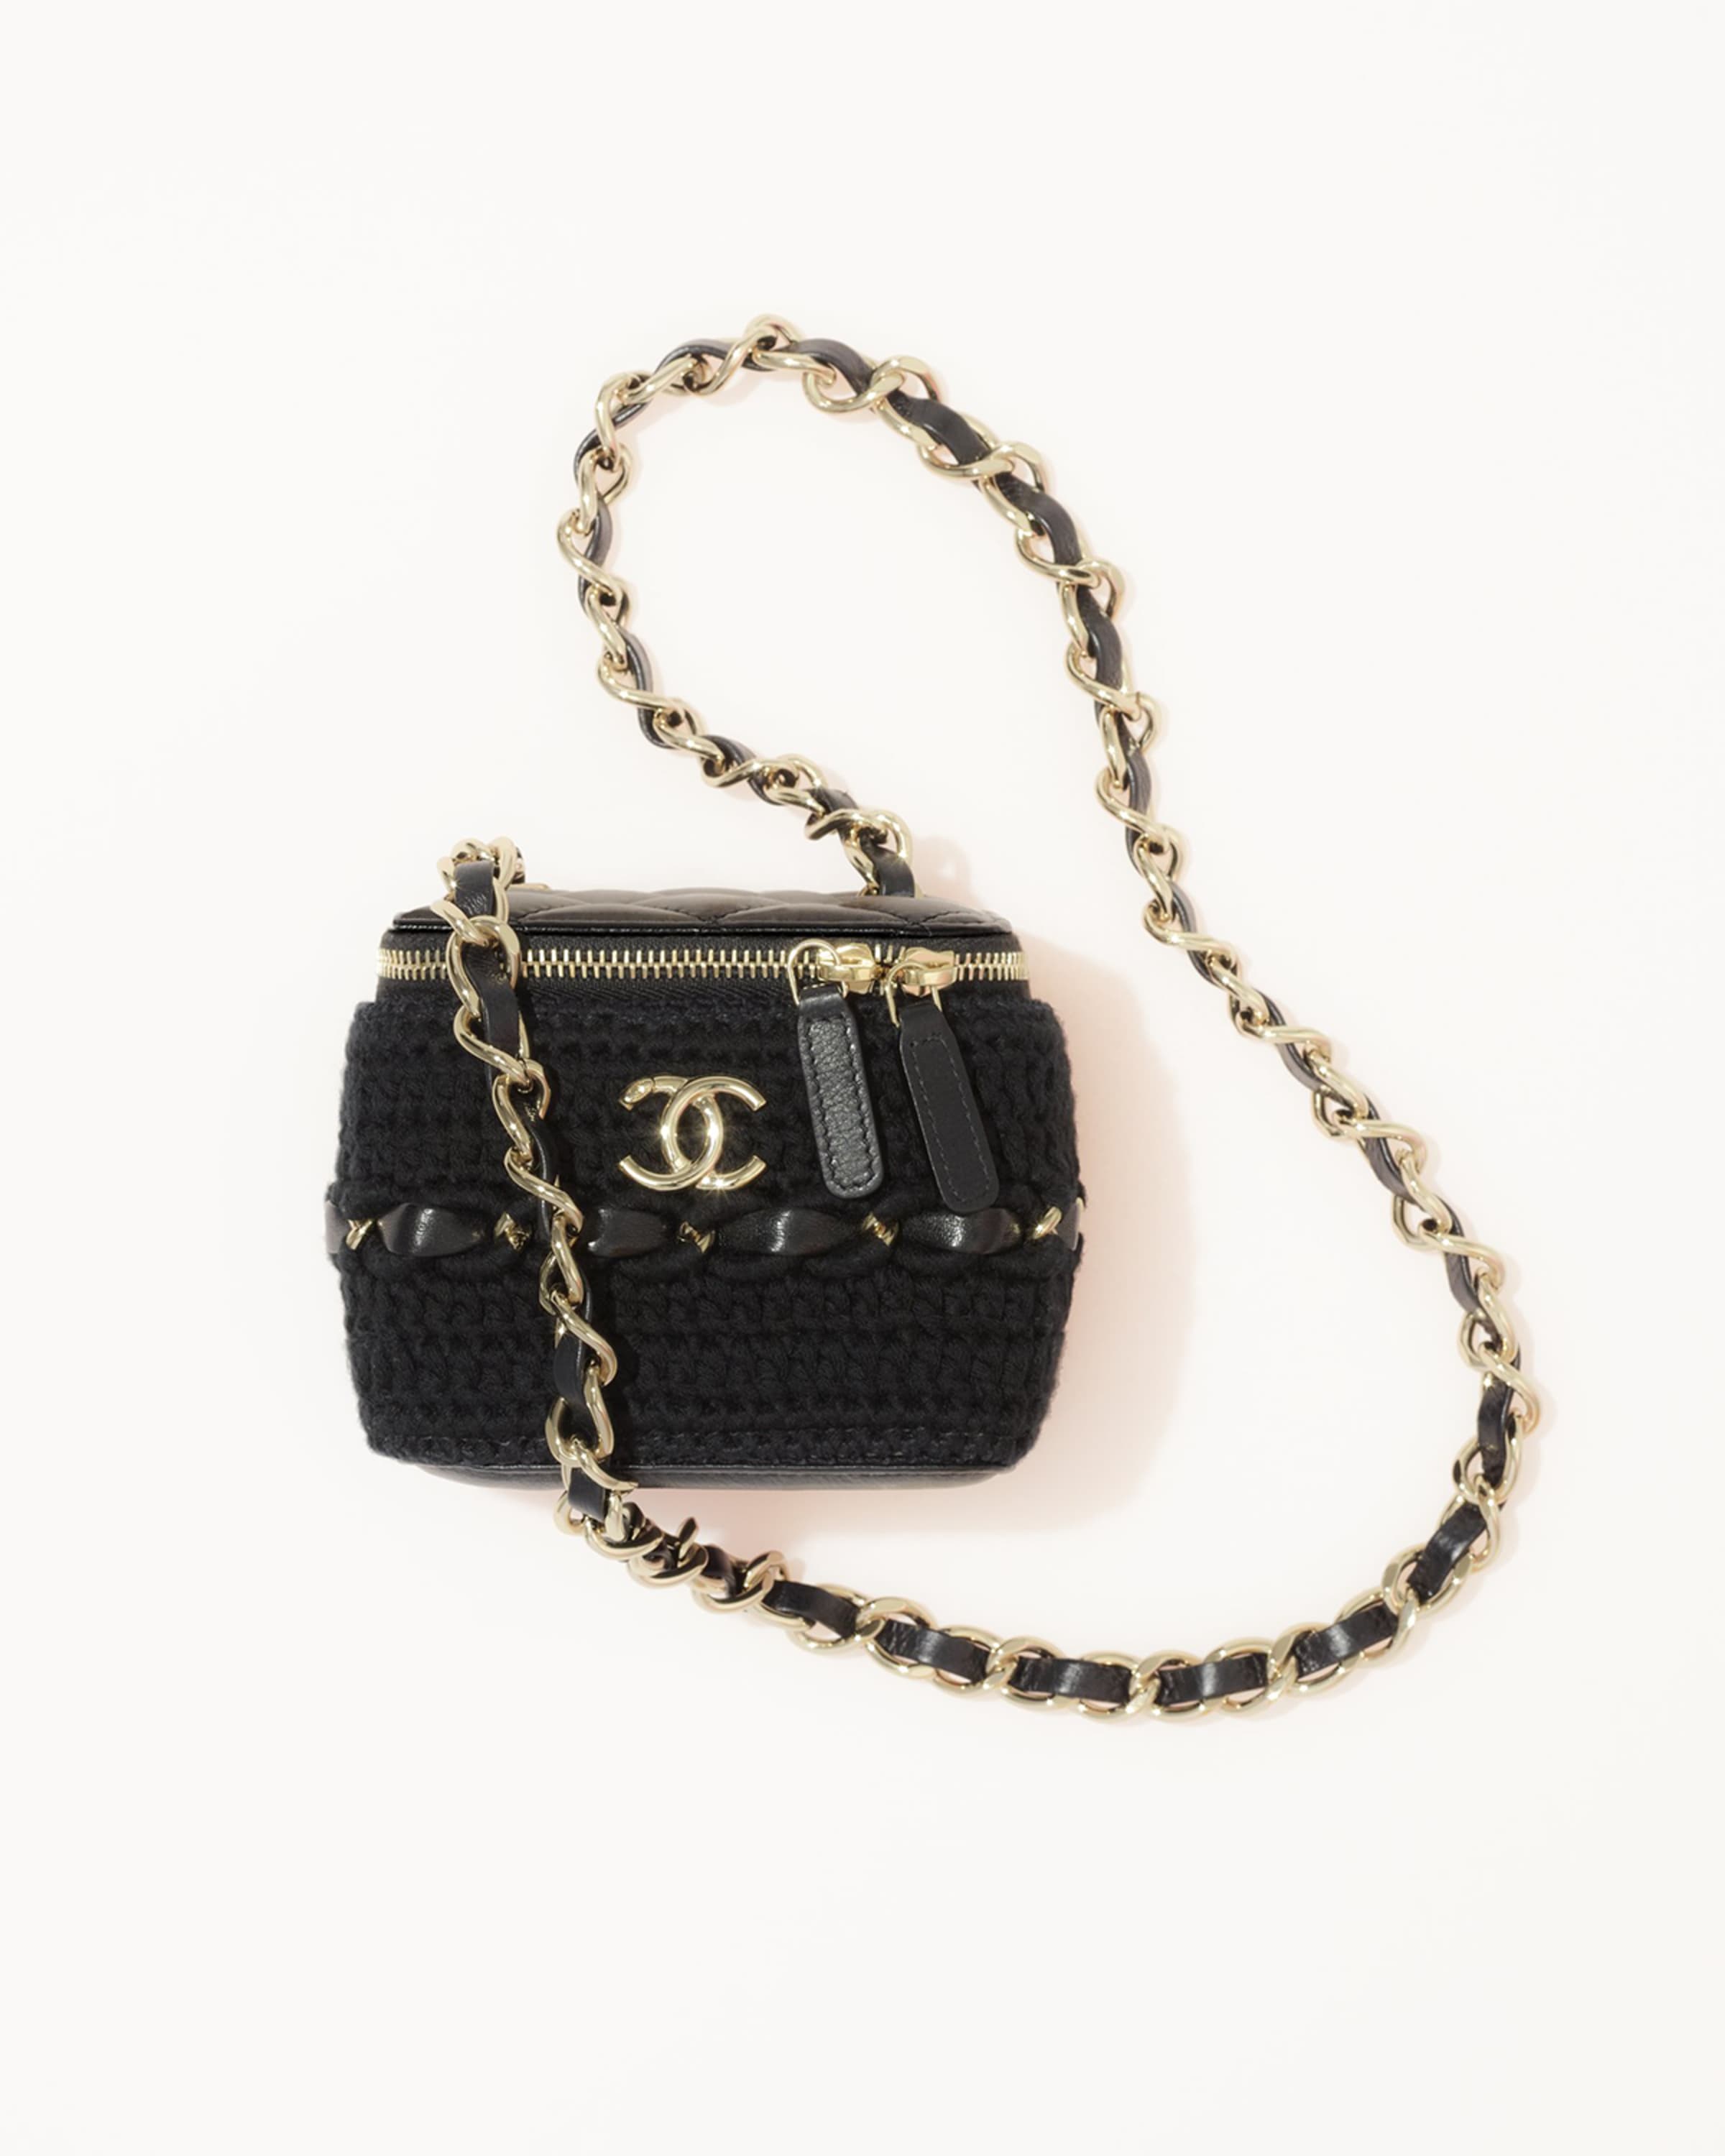 CHANEL SMALL VANITY WITH CHAIN | Neiman Marcus